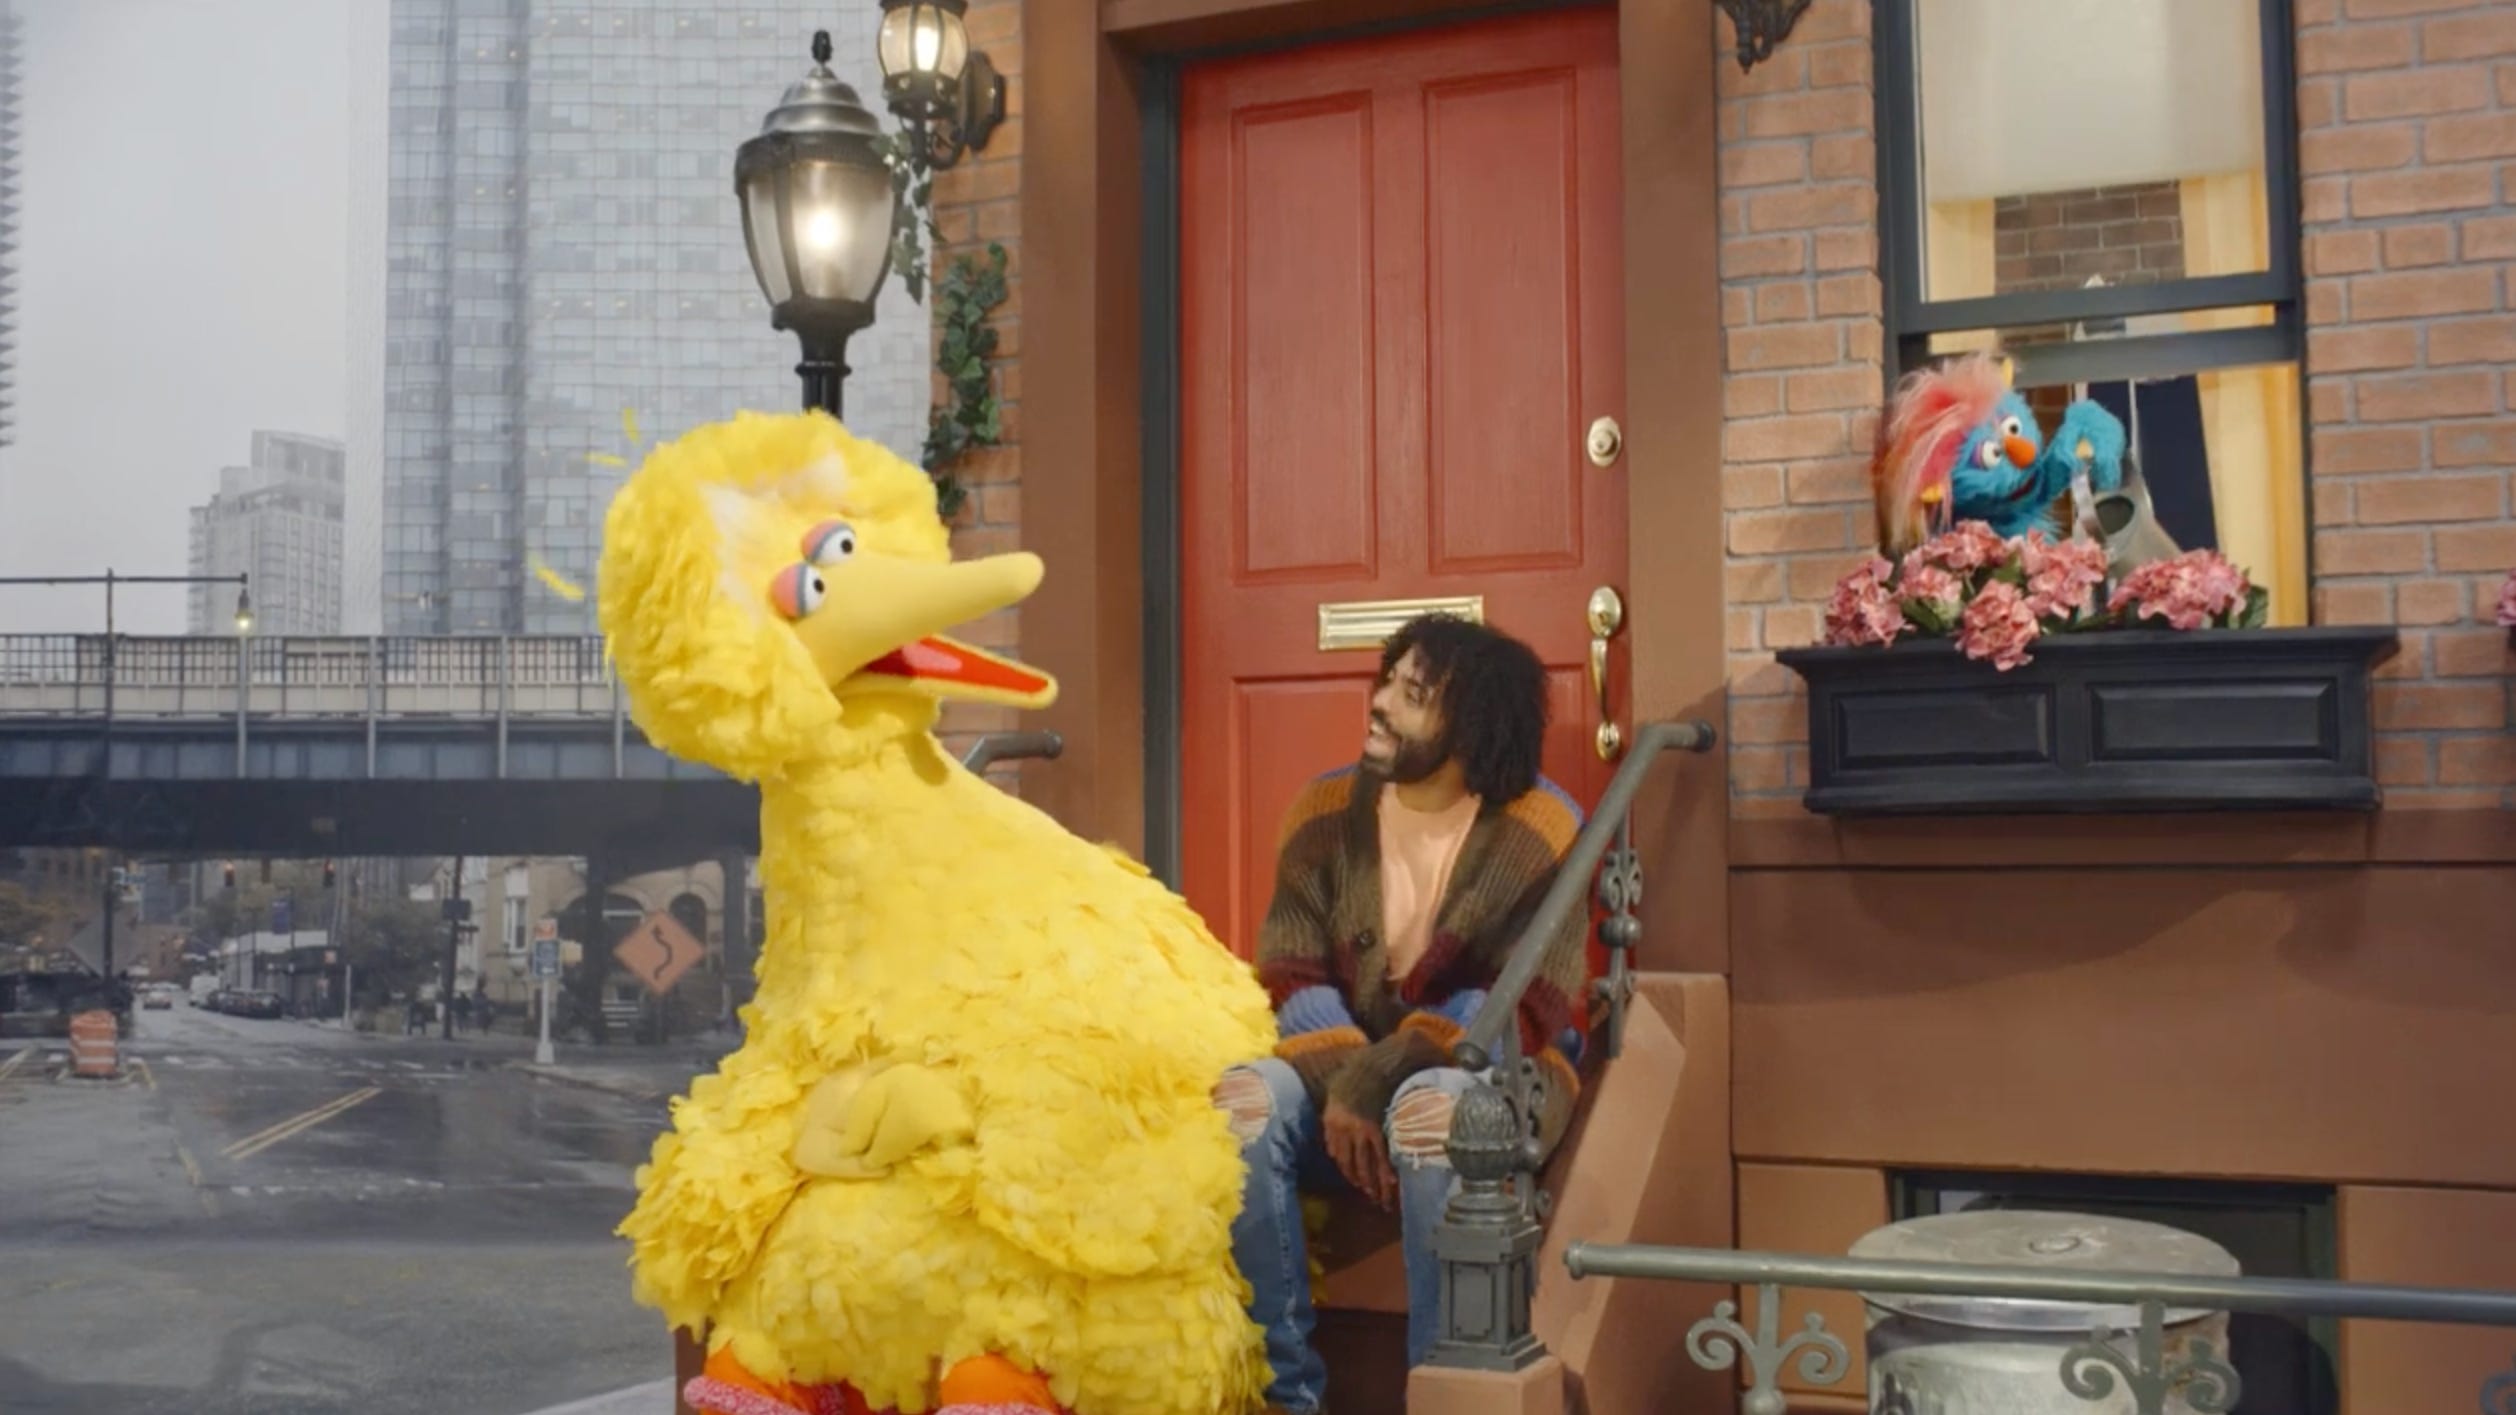 DoorDash finds its way to Sesame Street in its Super Bowl ad